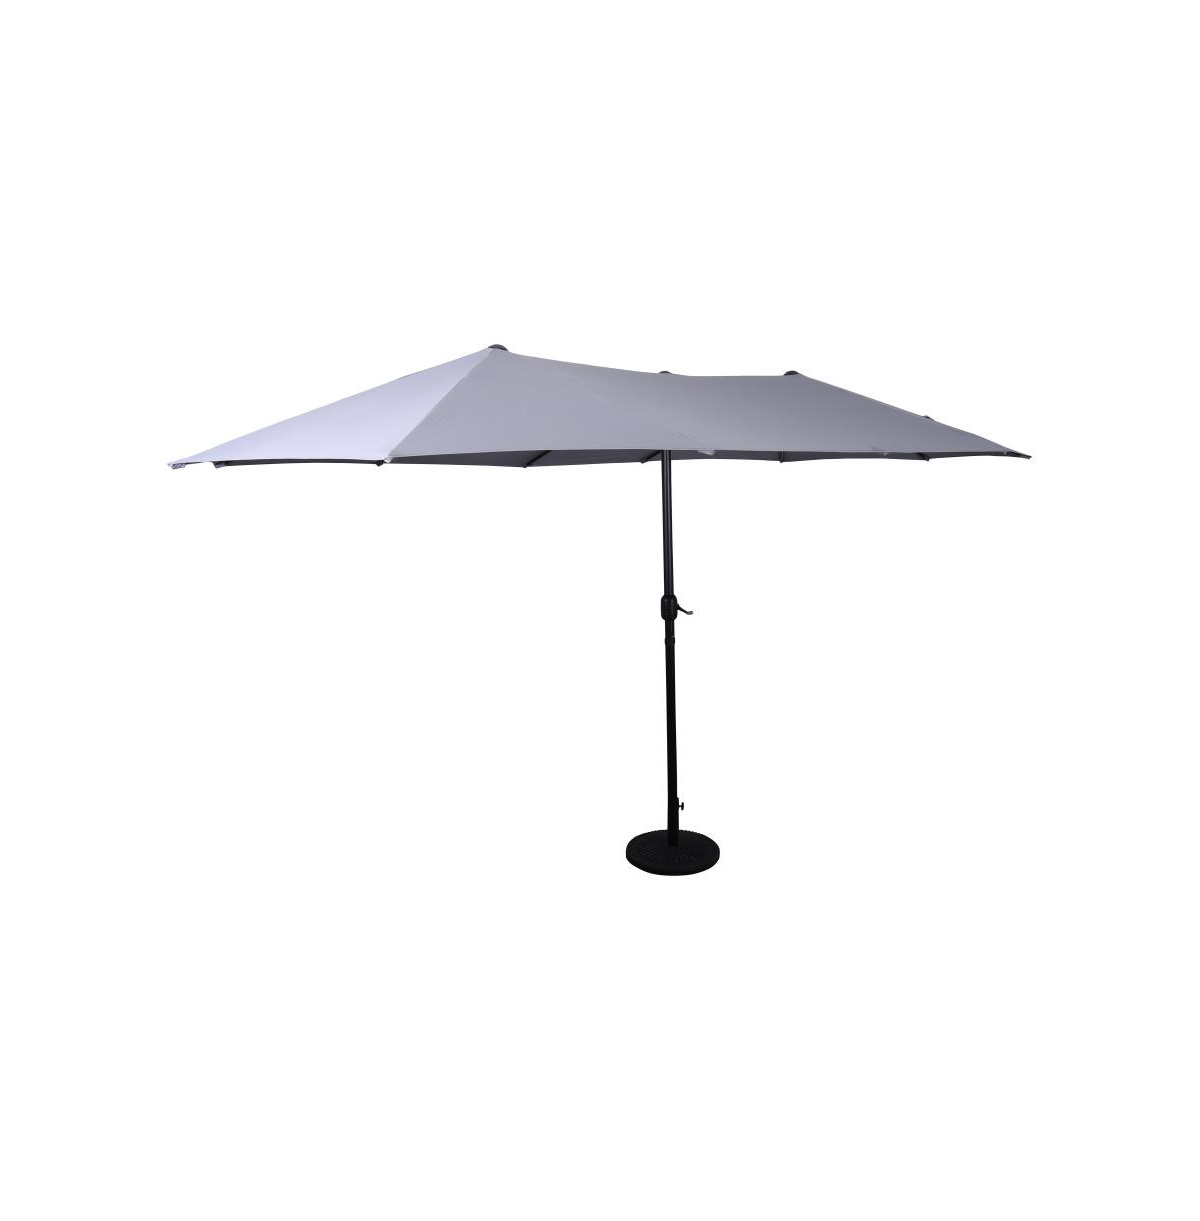 Evanston Triple Head Umbrella For Patio Use With Top Air Vents, Crank Handle, And Easy Tilt Function - Gray